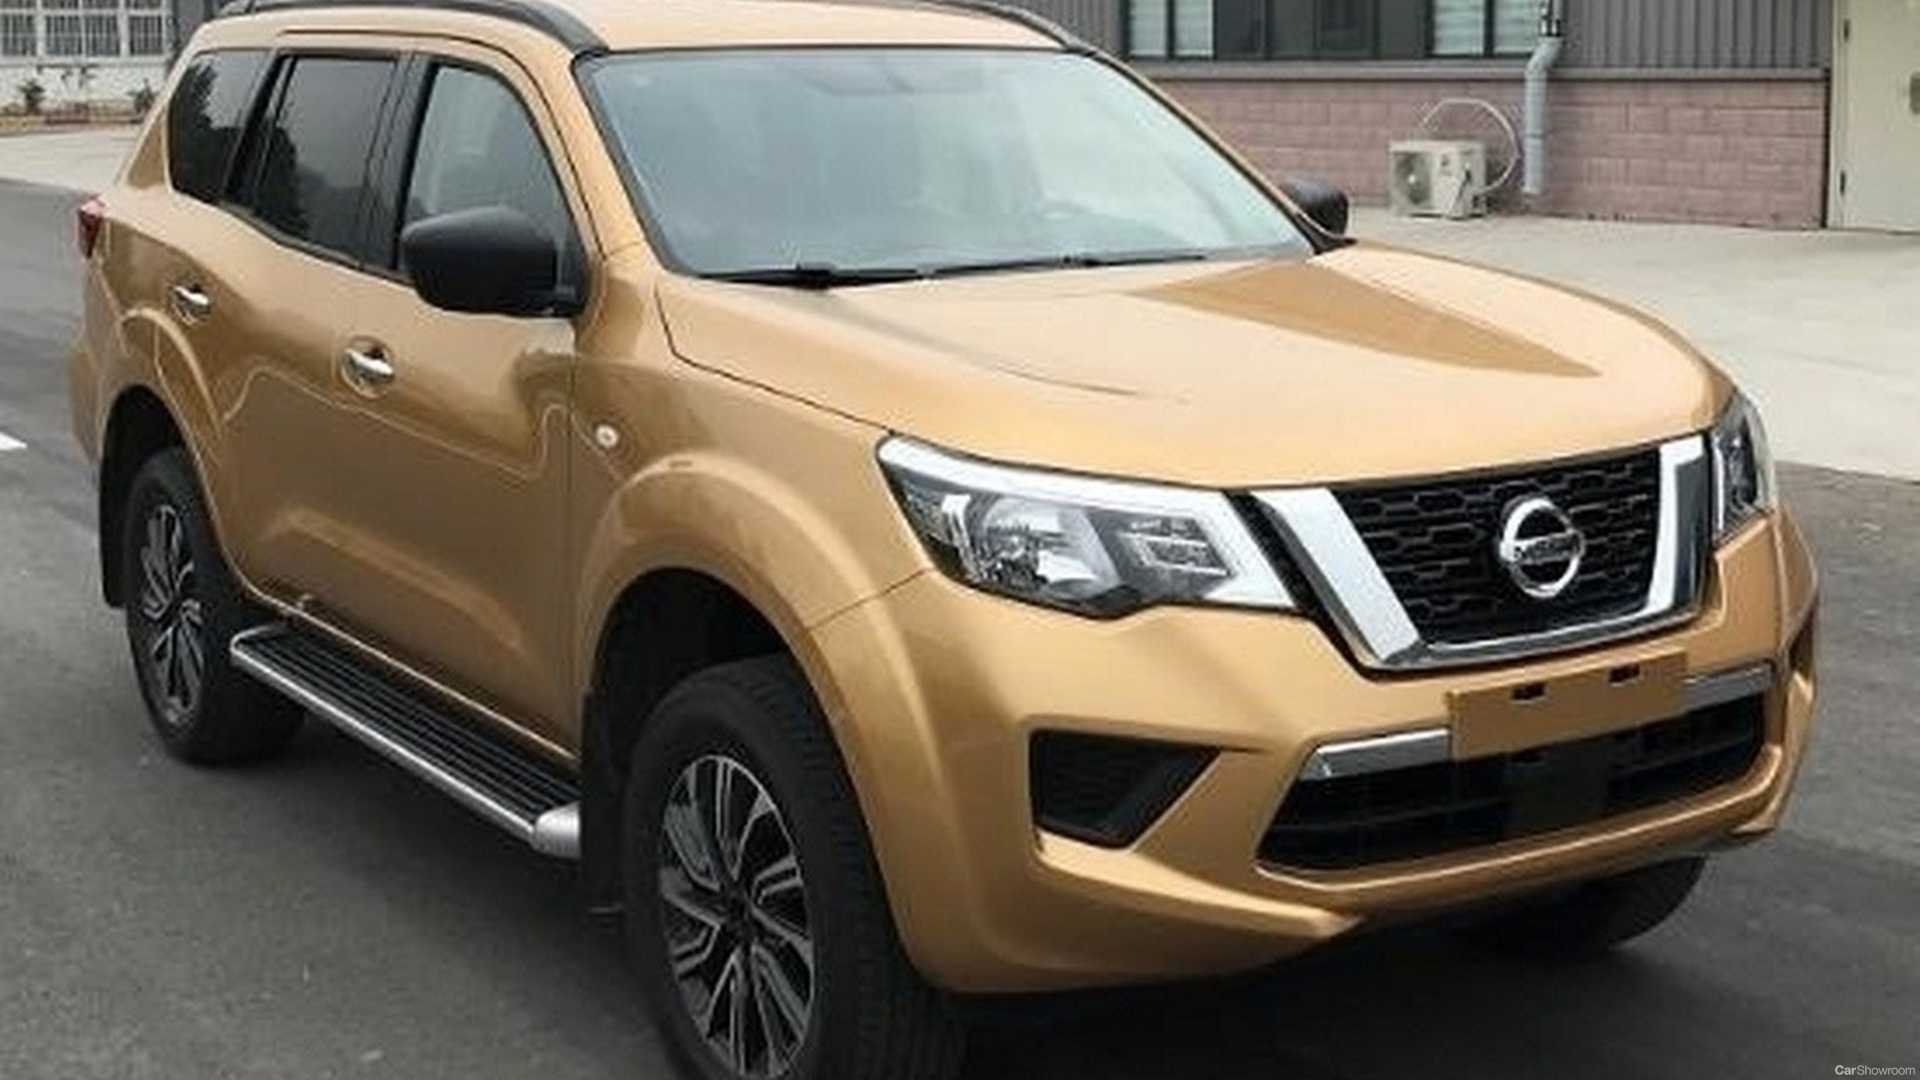 Pictures of the upcoming Nissan Terra 4x4 were leaked by some websites  